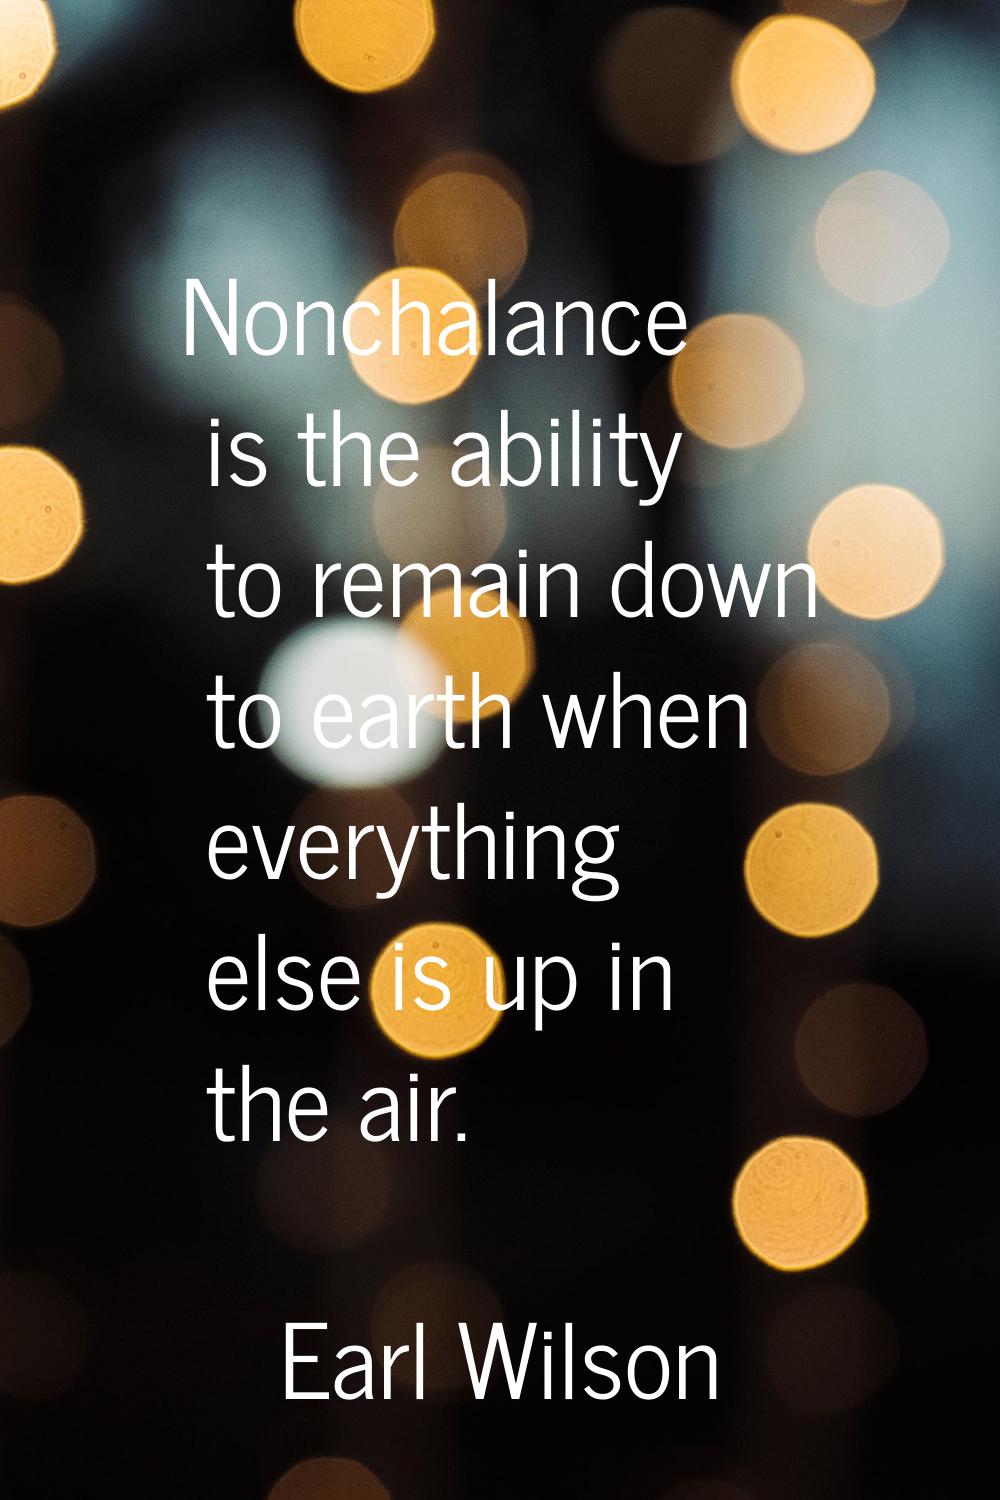 Nonchalance is the ability to remain down to earth when everything else is up in the air.